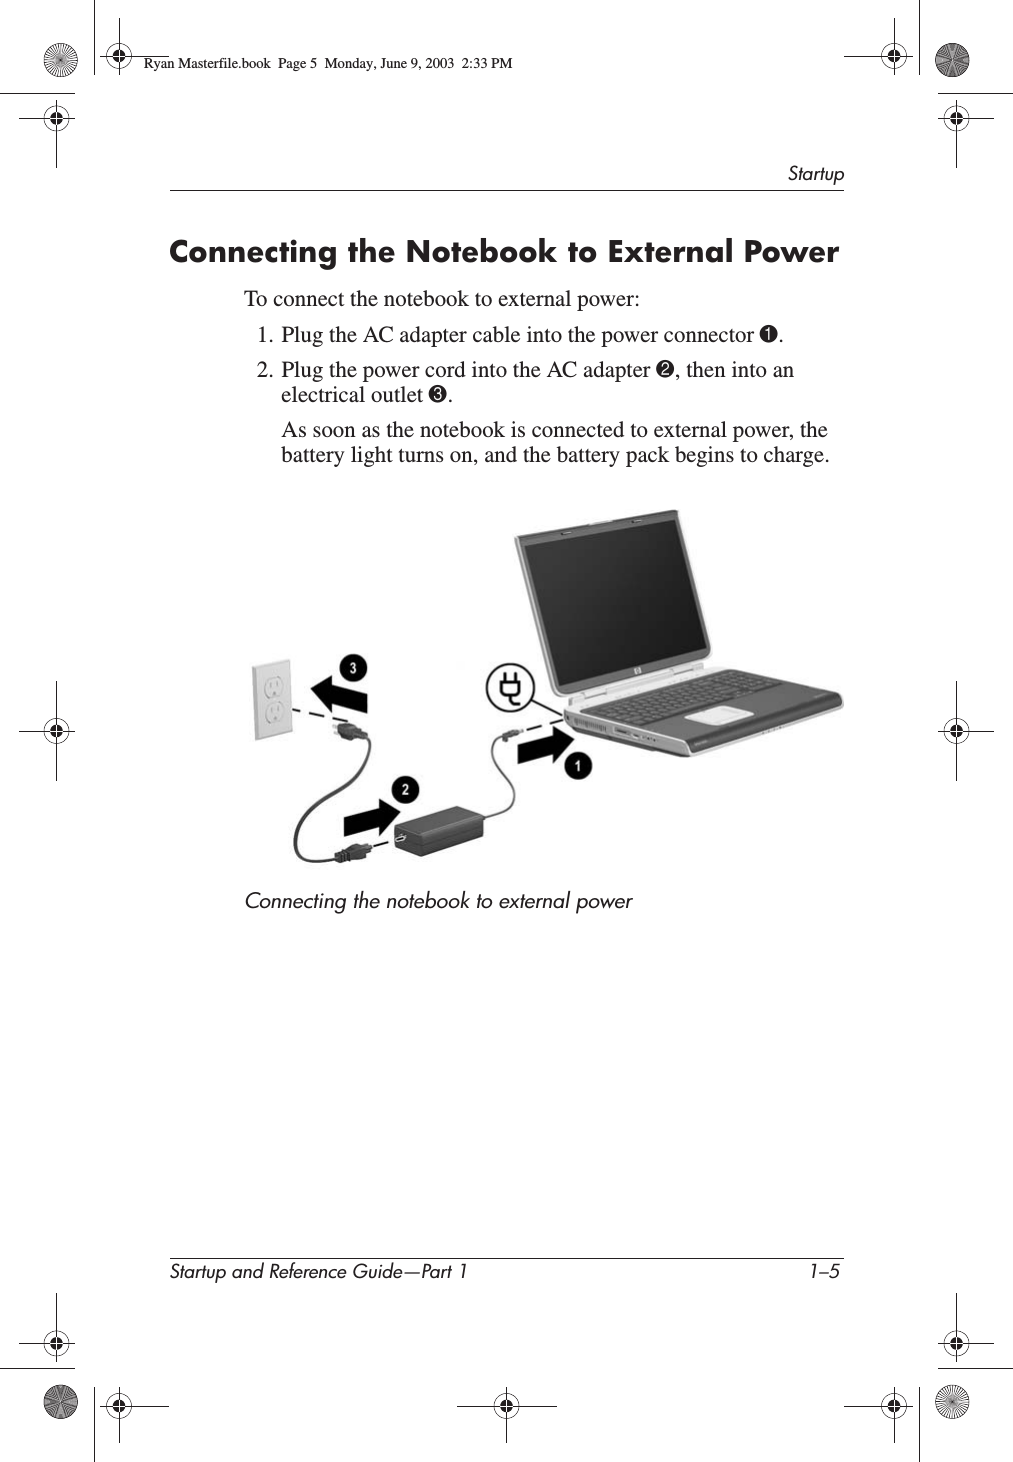 StartupStartup and Reference Guide—Part 1 1–5Connecting the Notebook to External PowerTo connect the notebook to external power:1. Plug the AC adapter cable into the power connector 1.2. Plug the power cord into the AC adapter 2, then into an electrical outlet 3.As soon as the notebook is connected to external power, the battery light turns on, and the battery pack begins to charge.Connecting the notebook to external powerRyan Masterfile.book  Page 5  Monday, June 9, 2003  2:33 PM